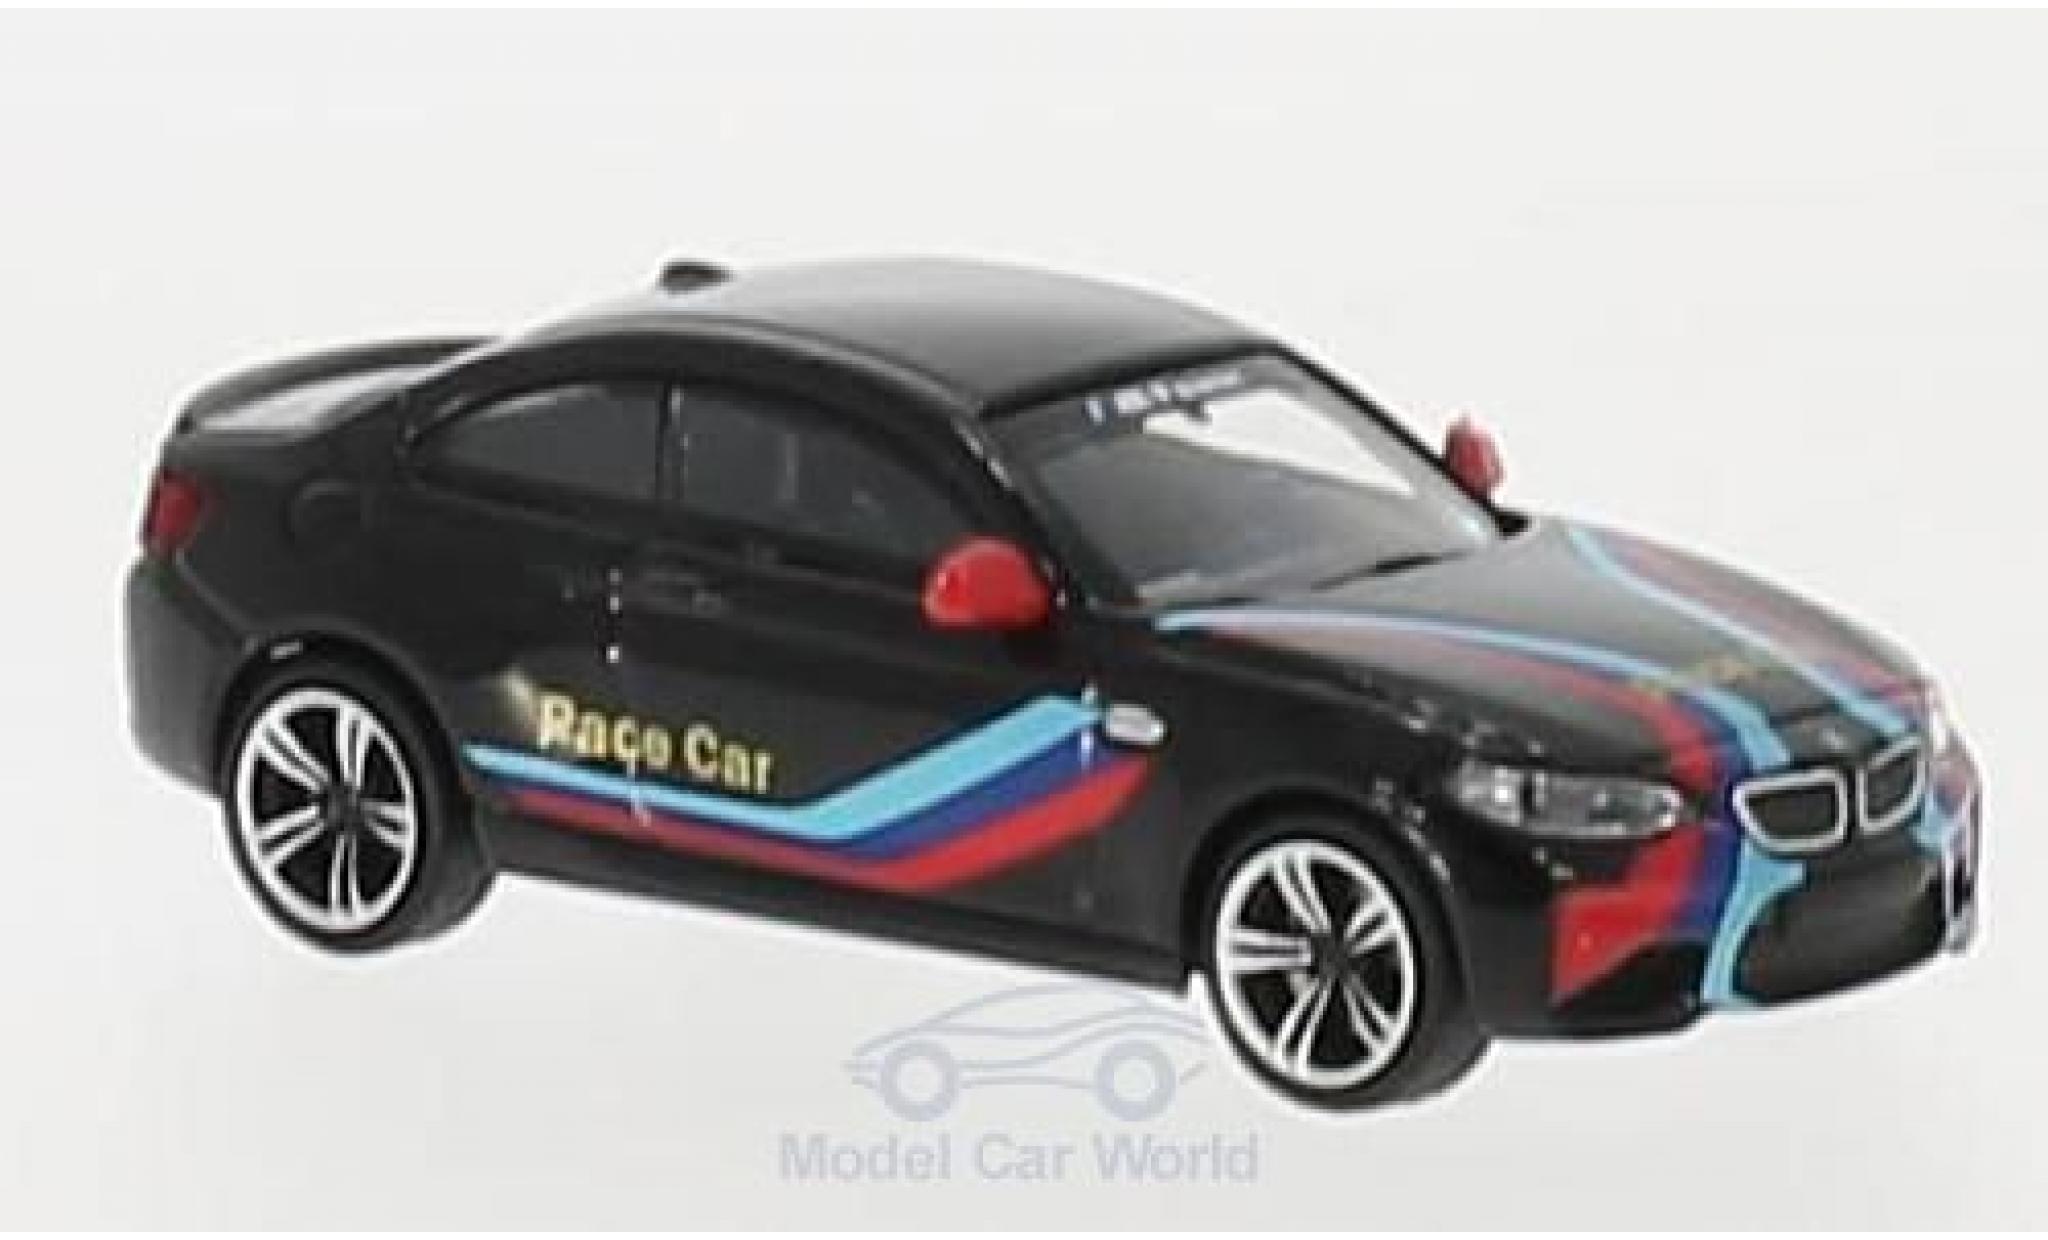 1/43 BMW M2 Coupe Model Car Metal Diecast Gift Toy Vehicle Kids Collection Blue